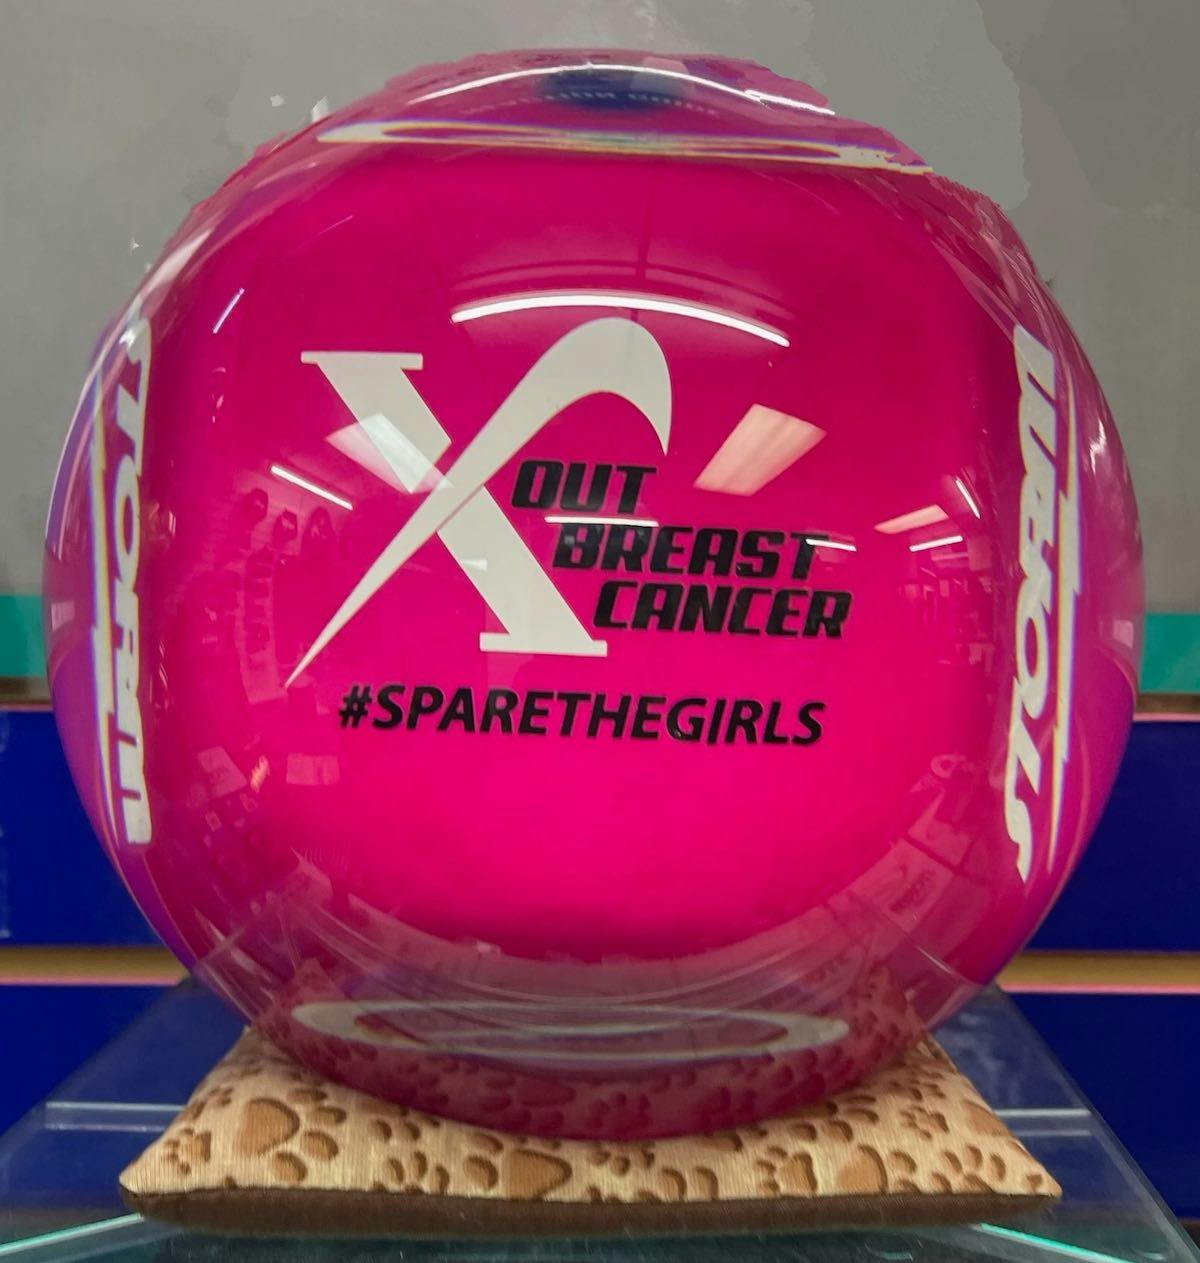 The raffle prize is a bowling ball with the charity logo